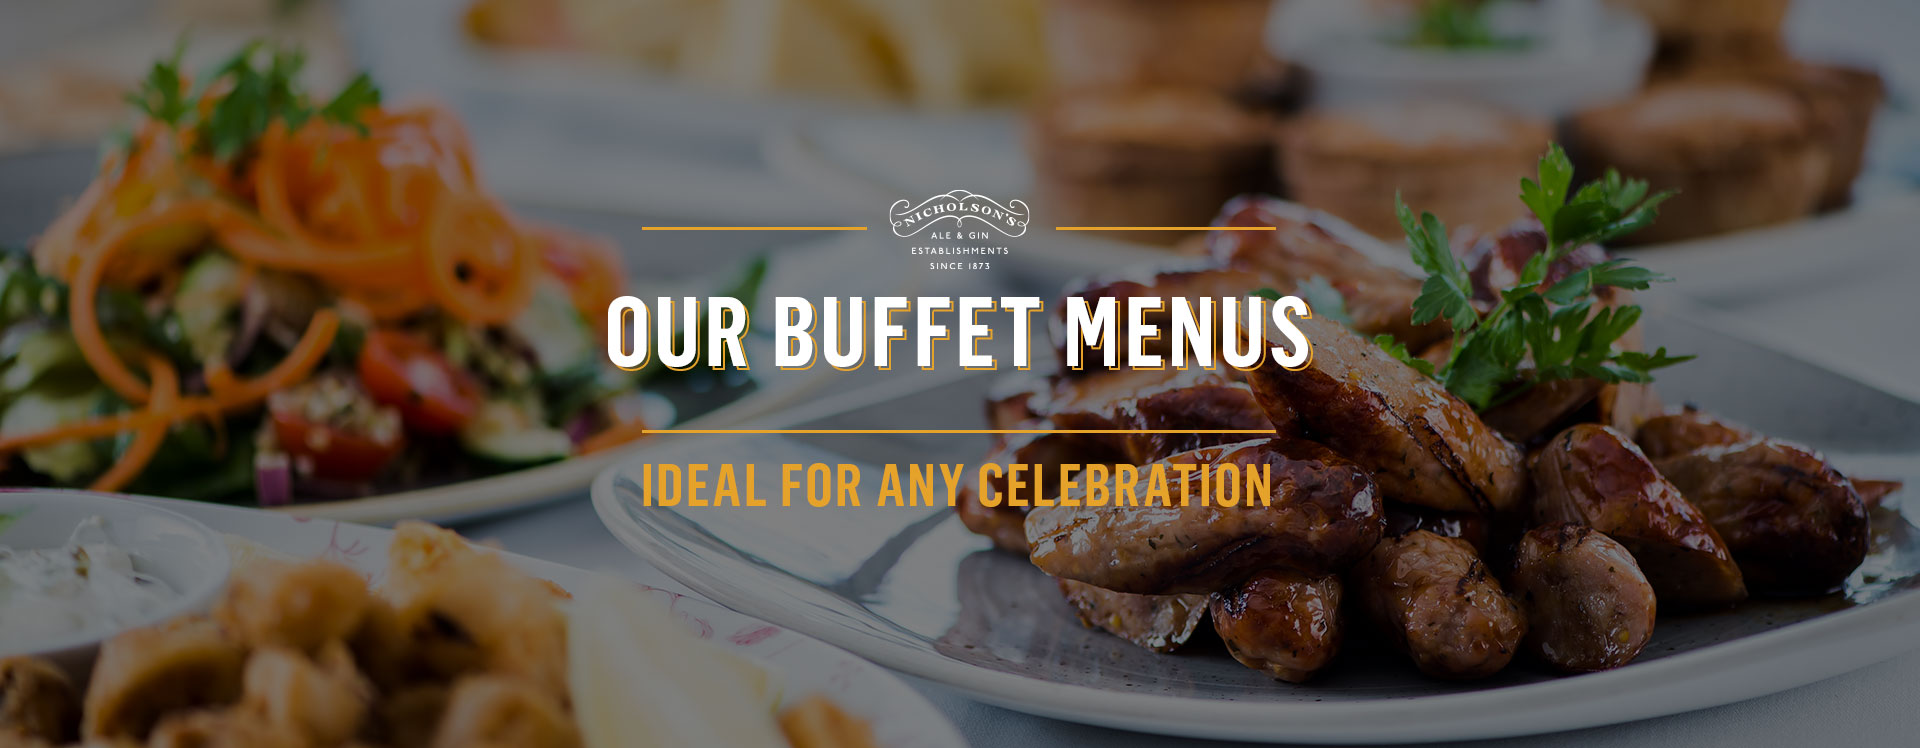 Buffet menu at The White Lion - Book a table